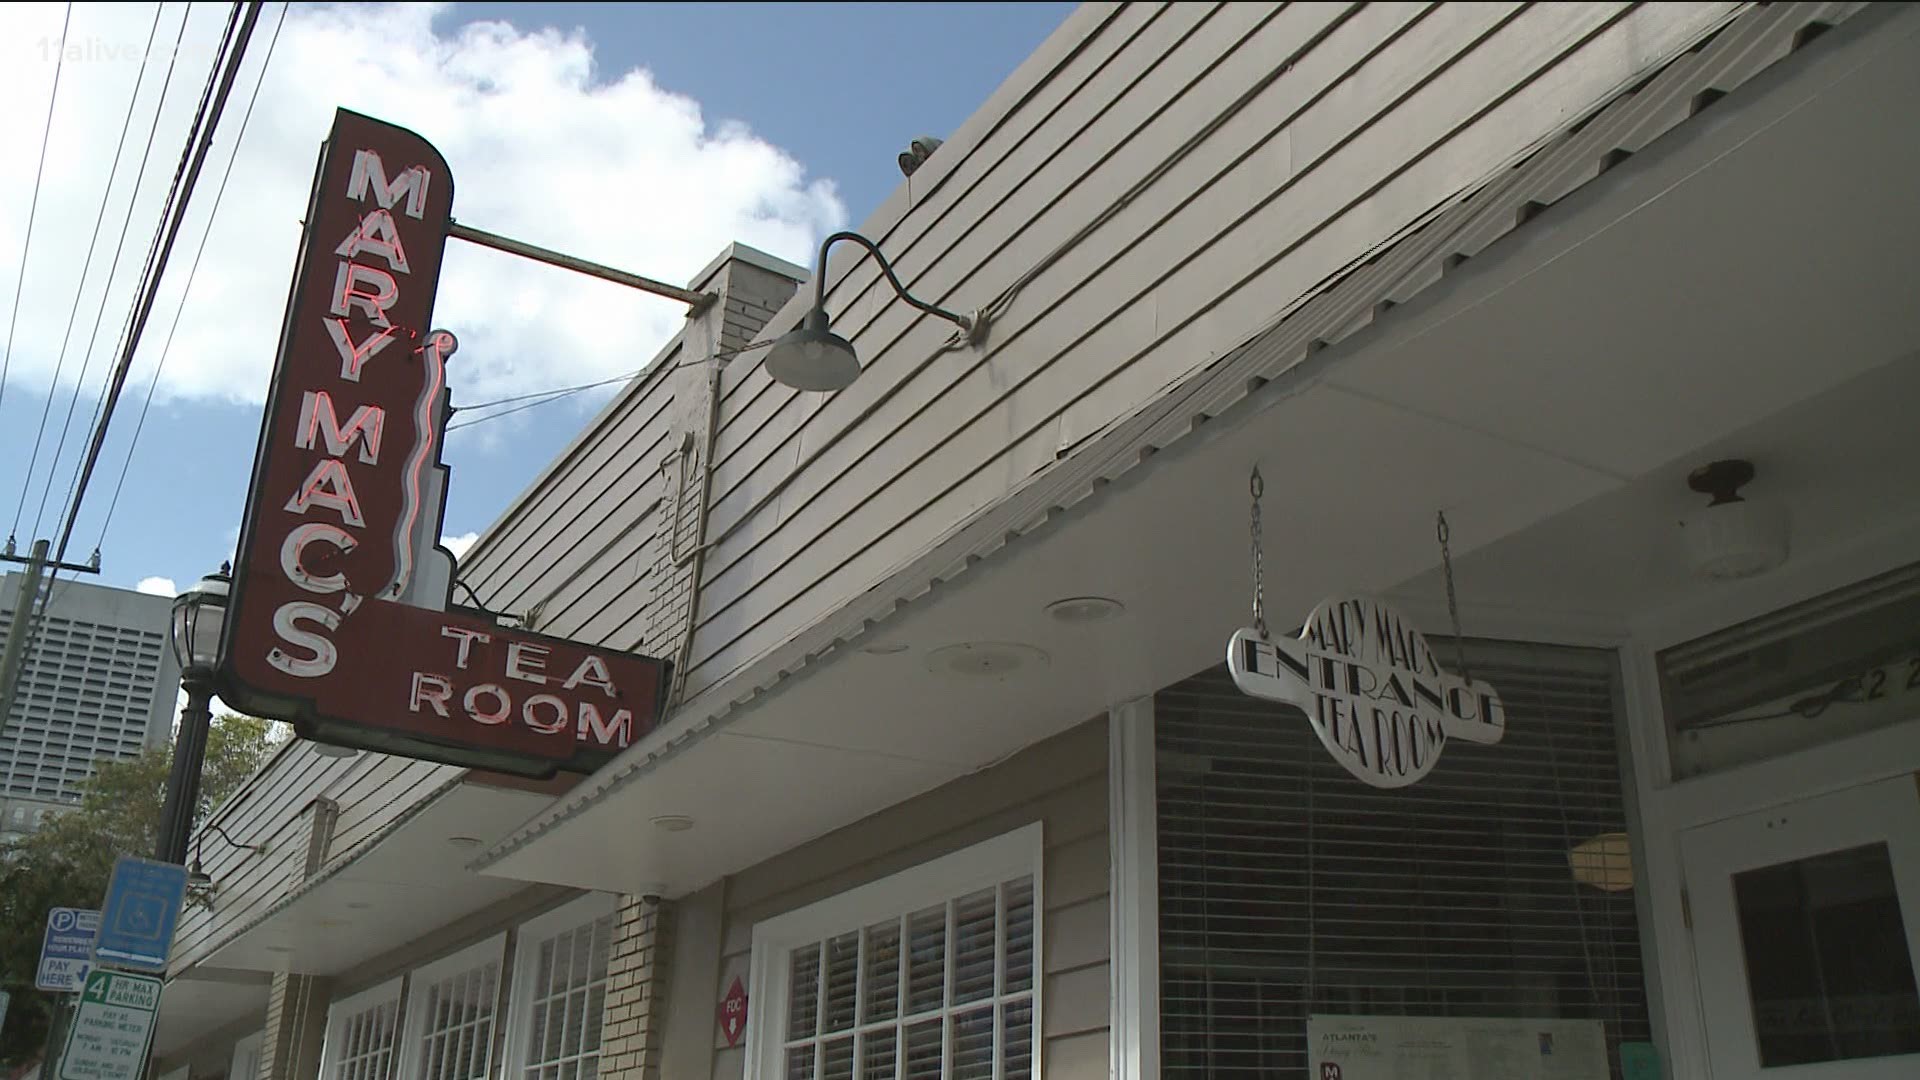 An Atlanta staple, which closed during the pandemic, will soon reopen.